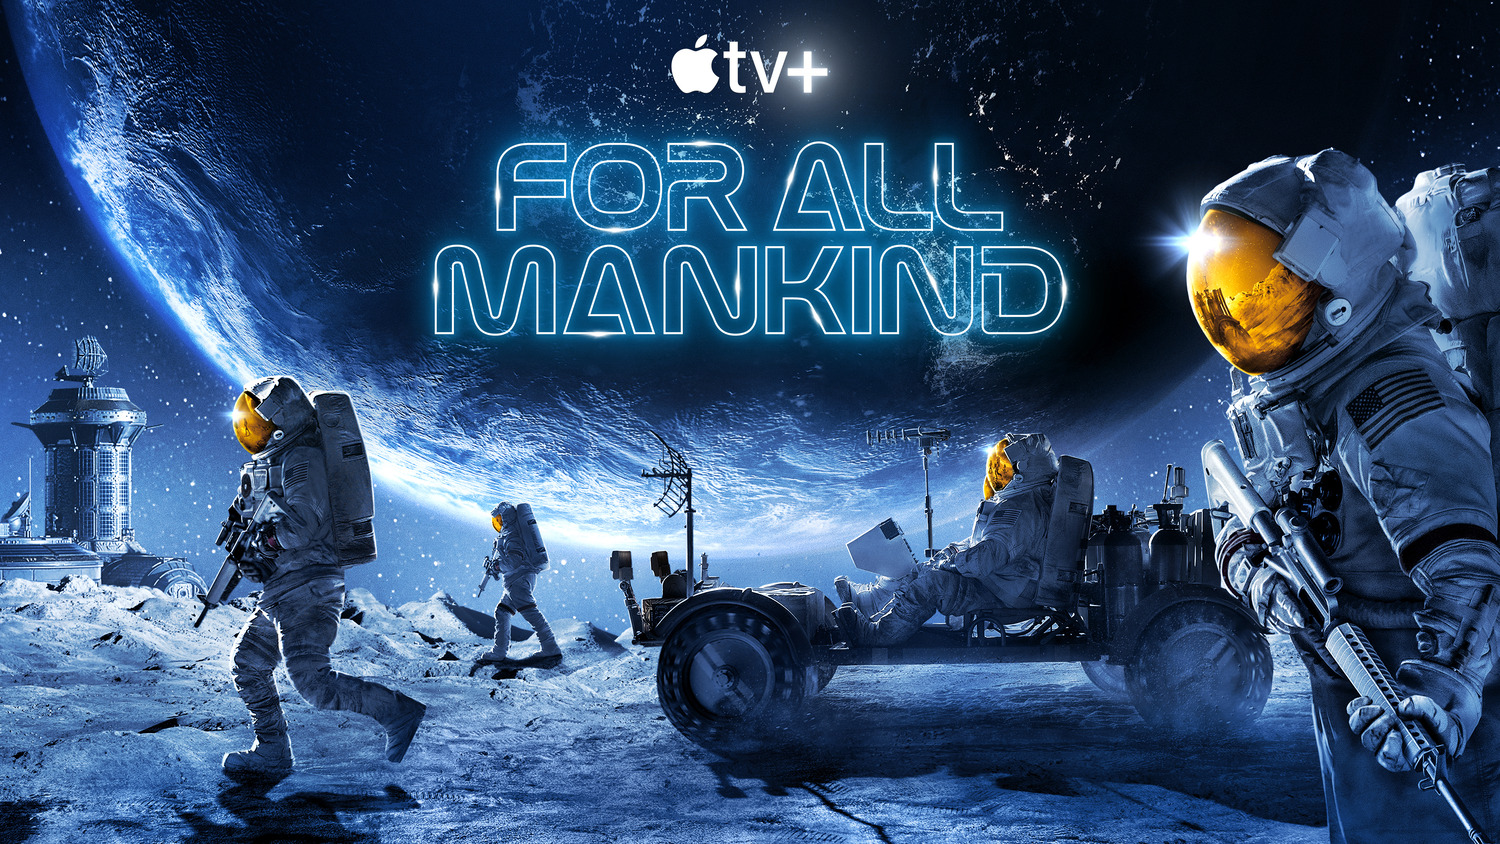 Extra Large Movie Poster Image for For All Mankind (#4 of 6)